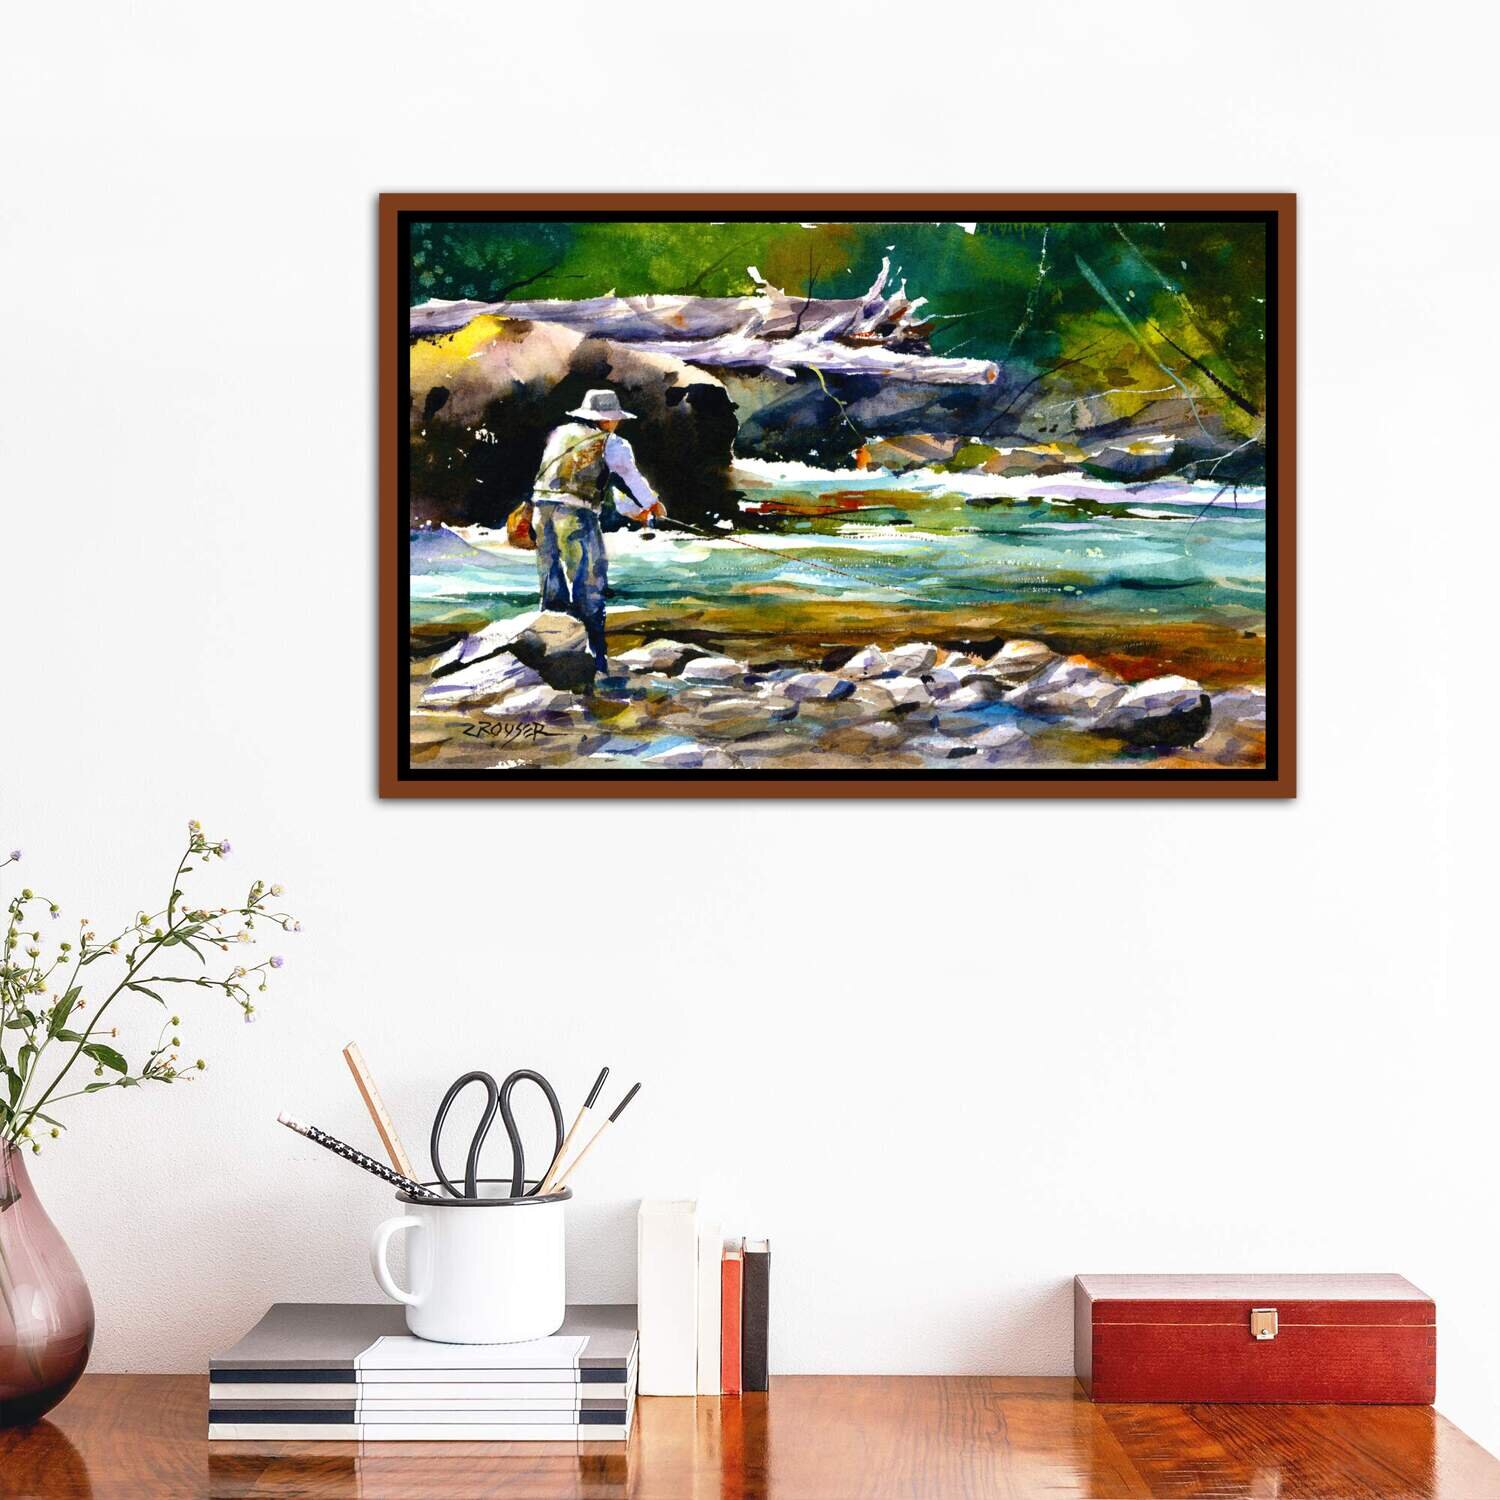  Fishing ' - Picture Frame Painting Print East Urban Home Format: Wrapped Canvas, Size: 8 H x 12 W x 0.75 D